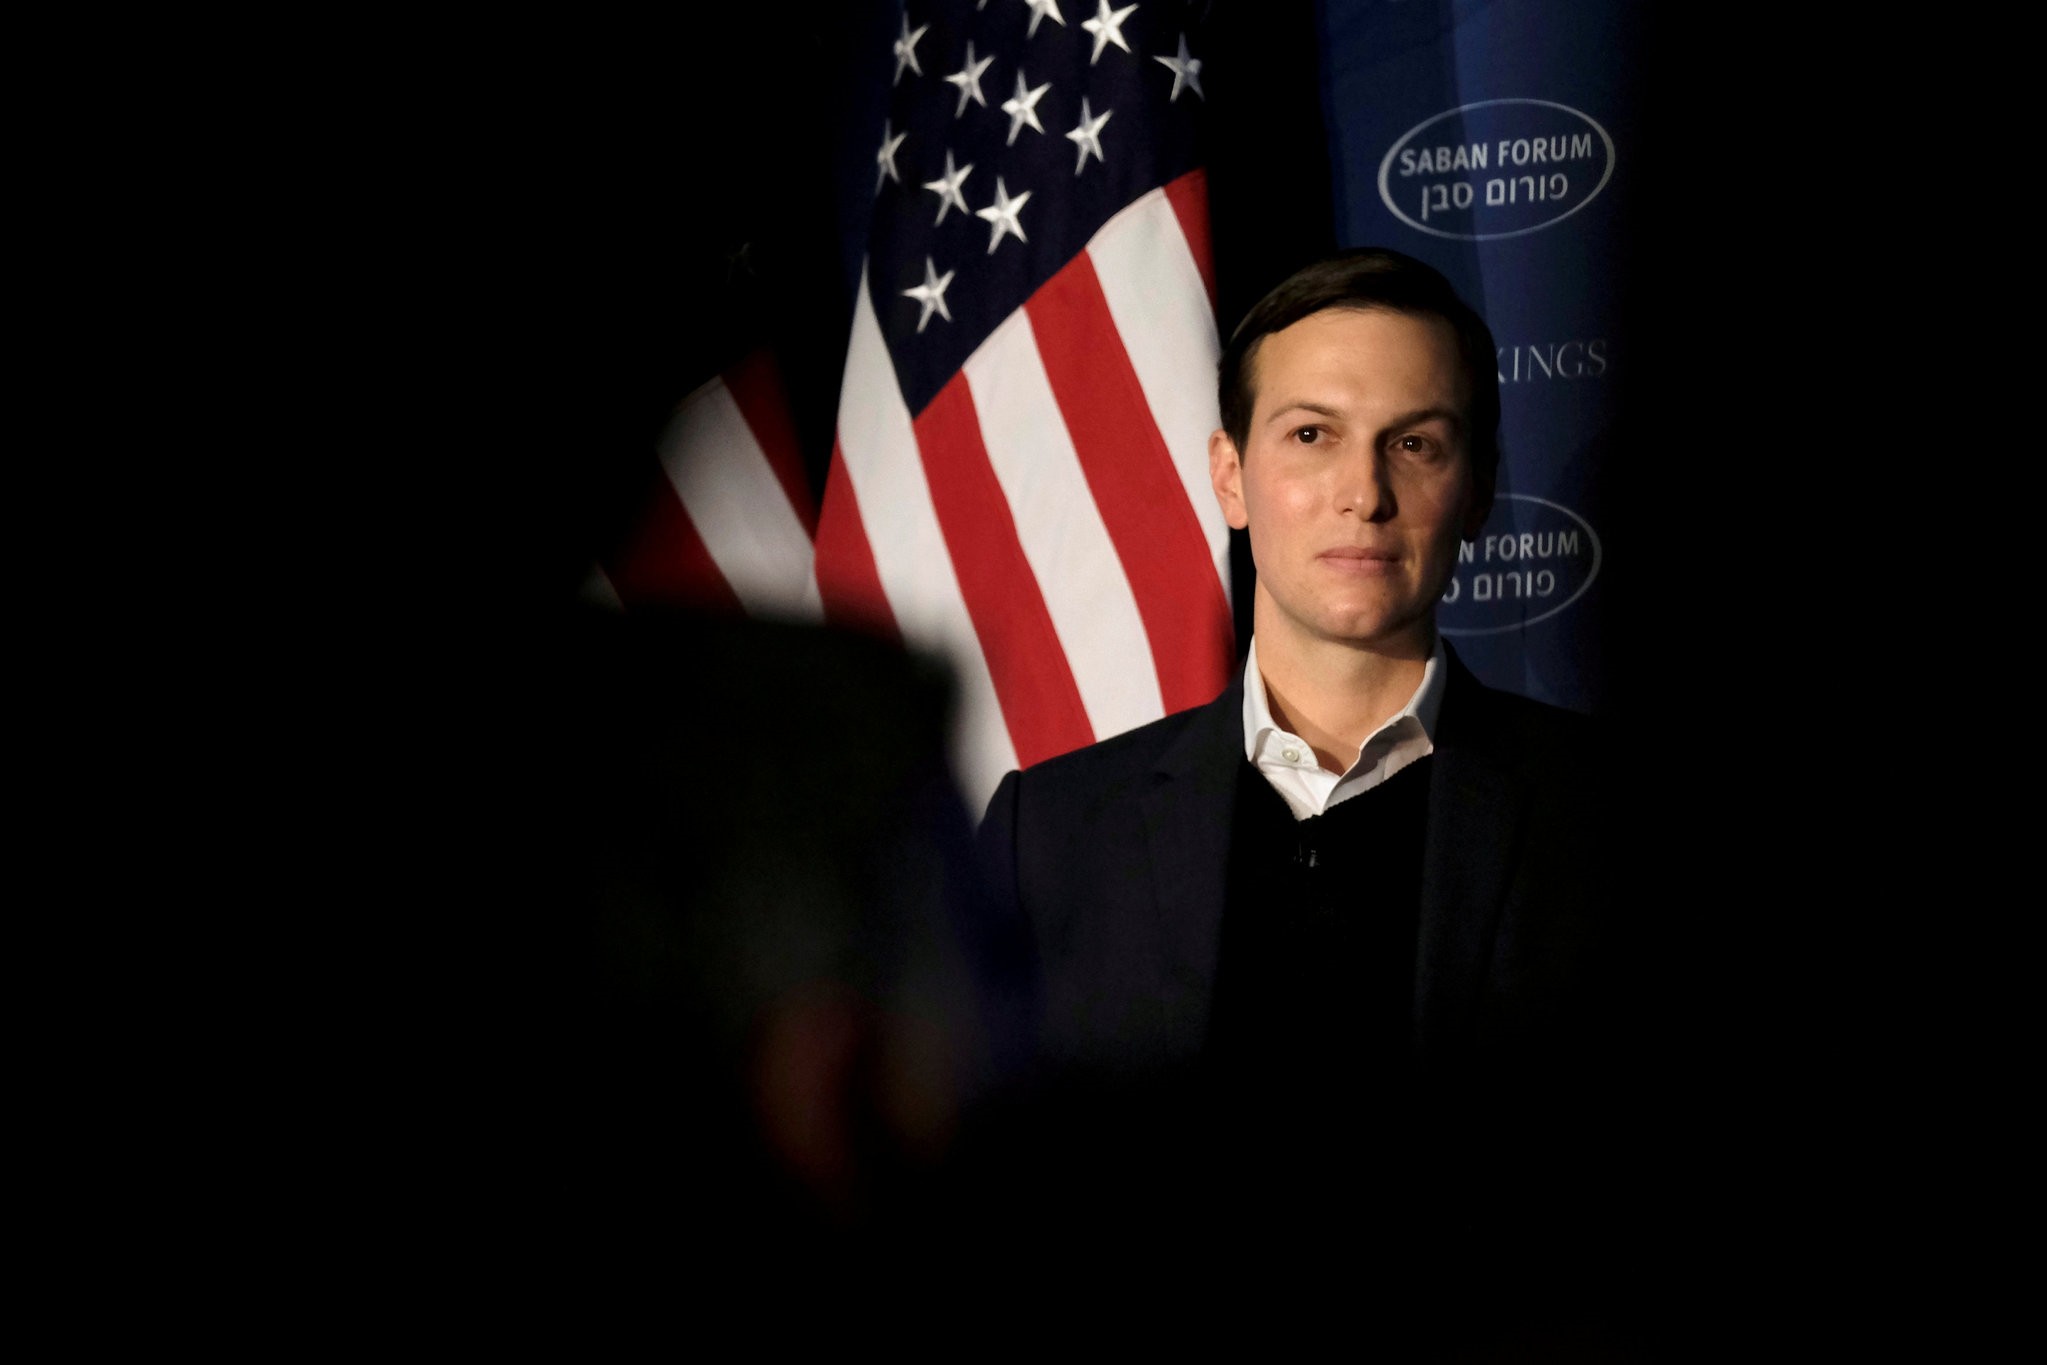 White House senior adviser Jared Kushner delivers remarks on the Trump administration's approach to the Middle East region at the Saban Forum in Washington, U.S., December 3, 2017. (REUTERS Photo)